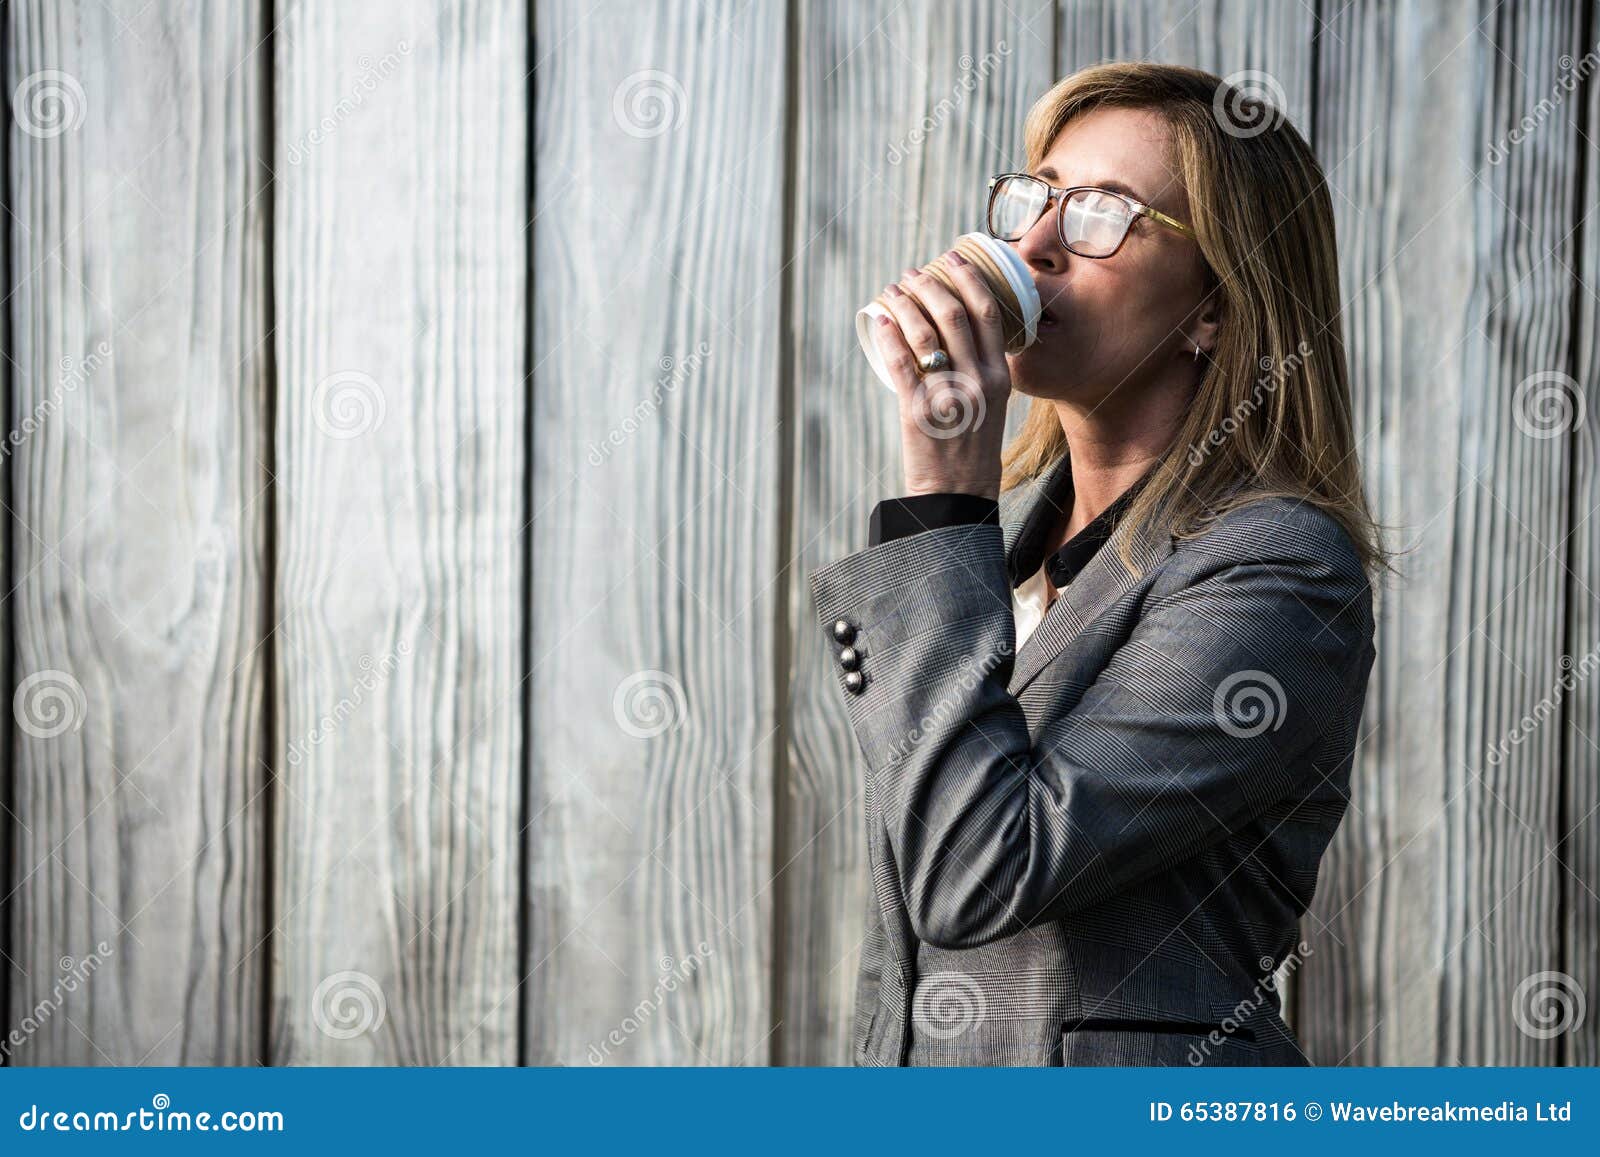 Woman Drinking Coffee Stock Photo Image Of Hair Attractive 65387816